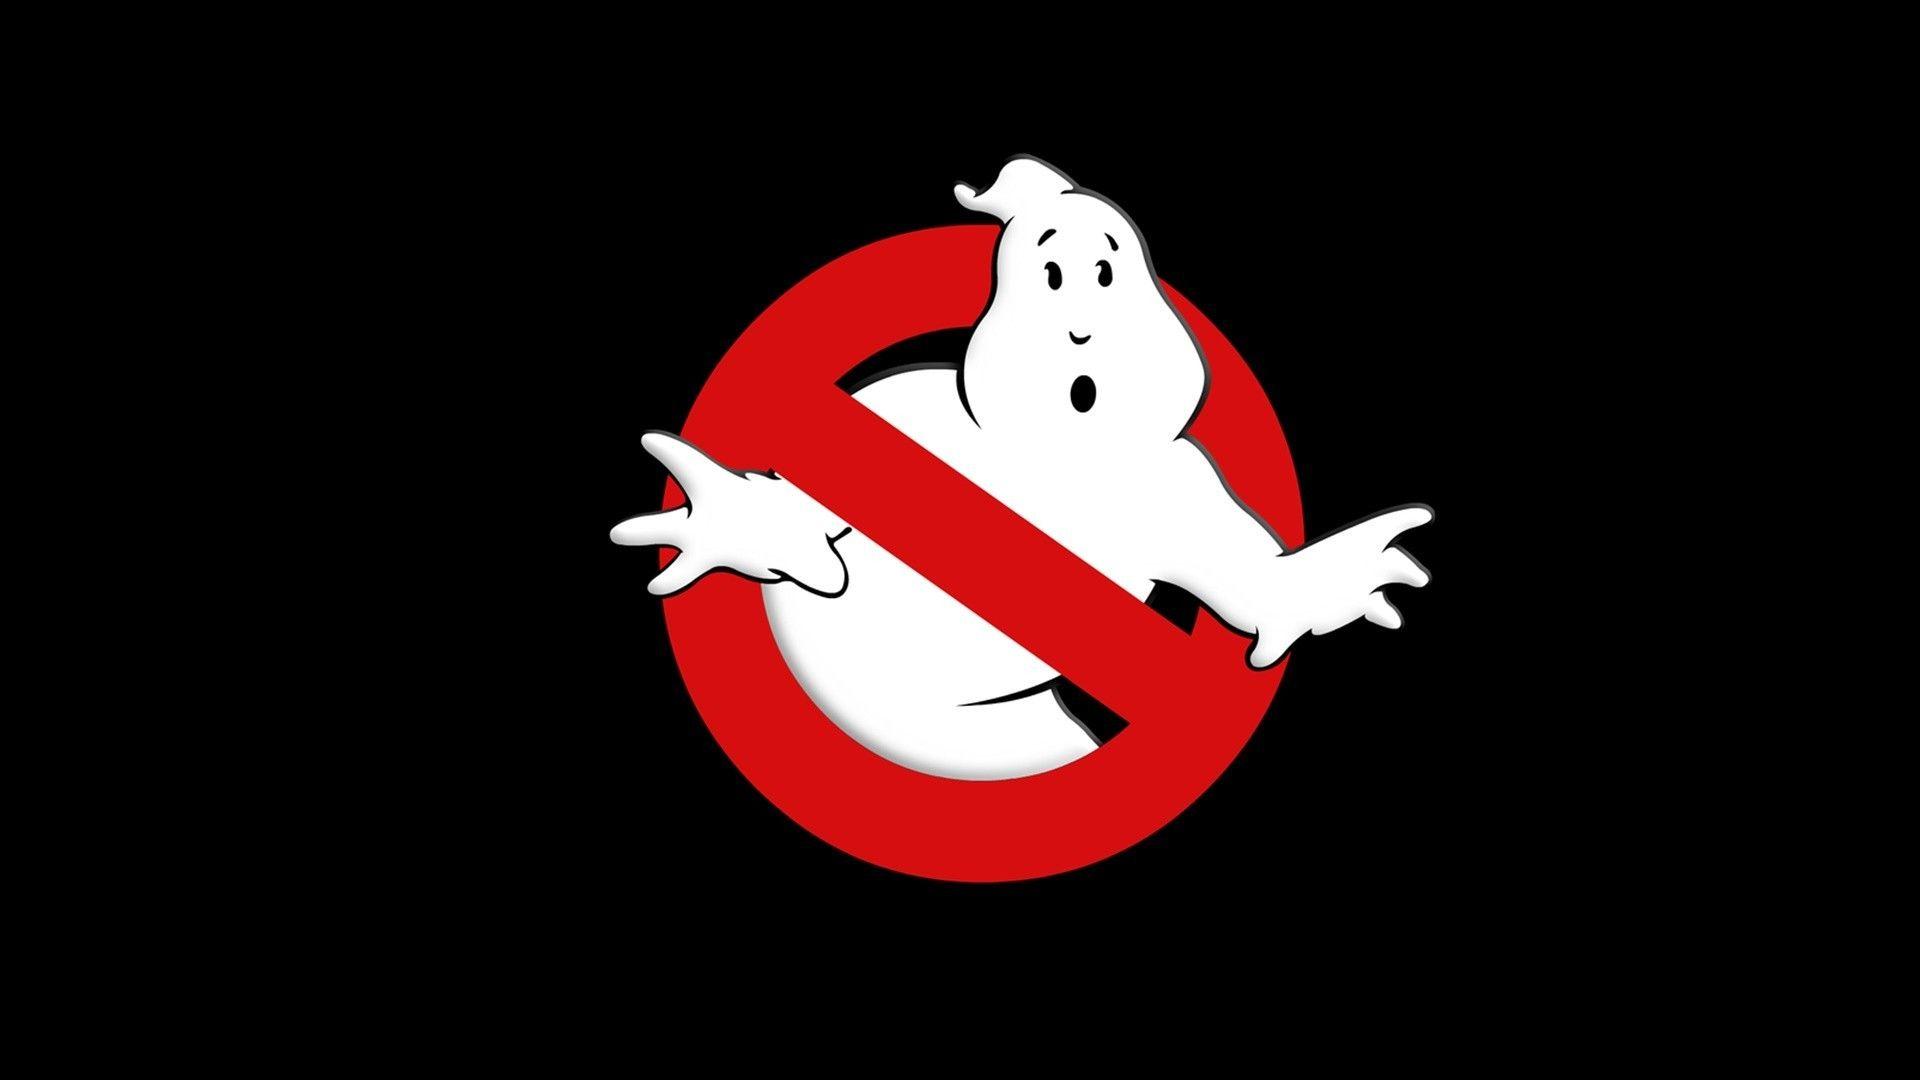 Ghostbusters Wallpaper, HD Image Ghostbusters Collection, W.Web